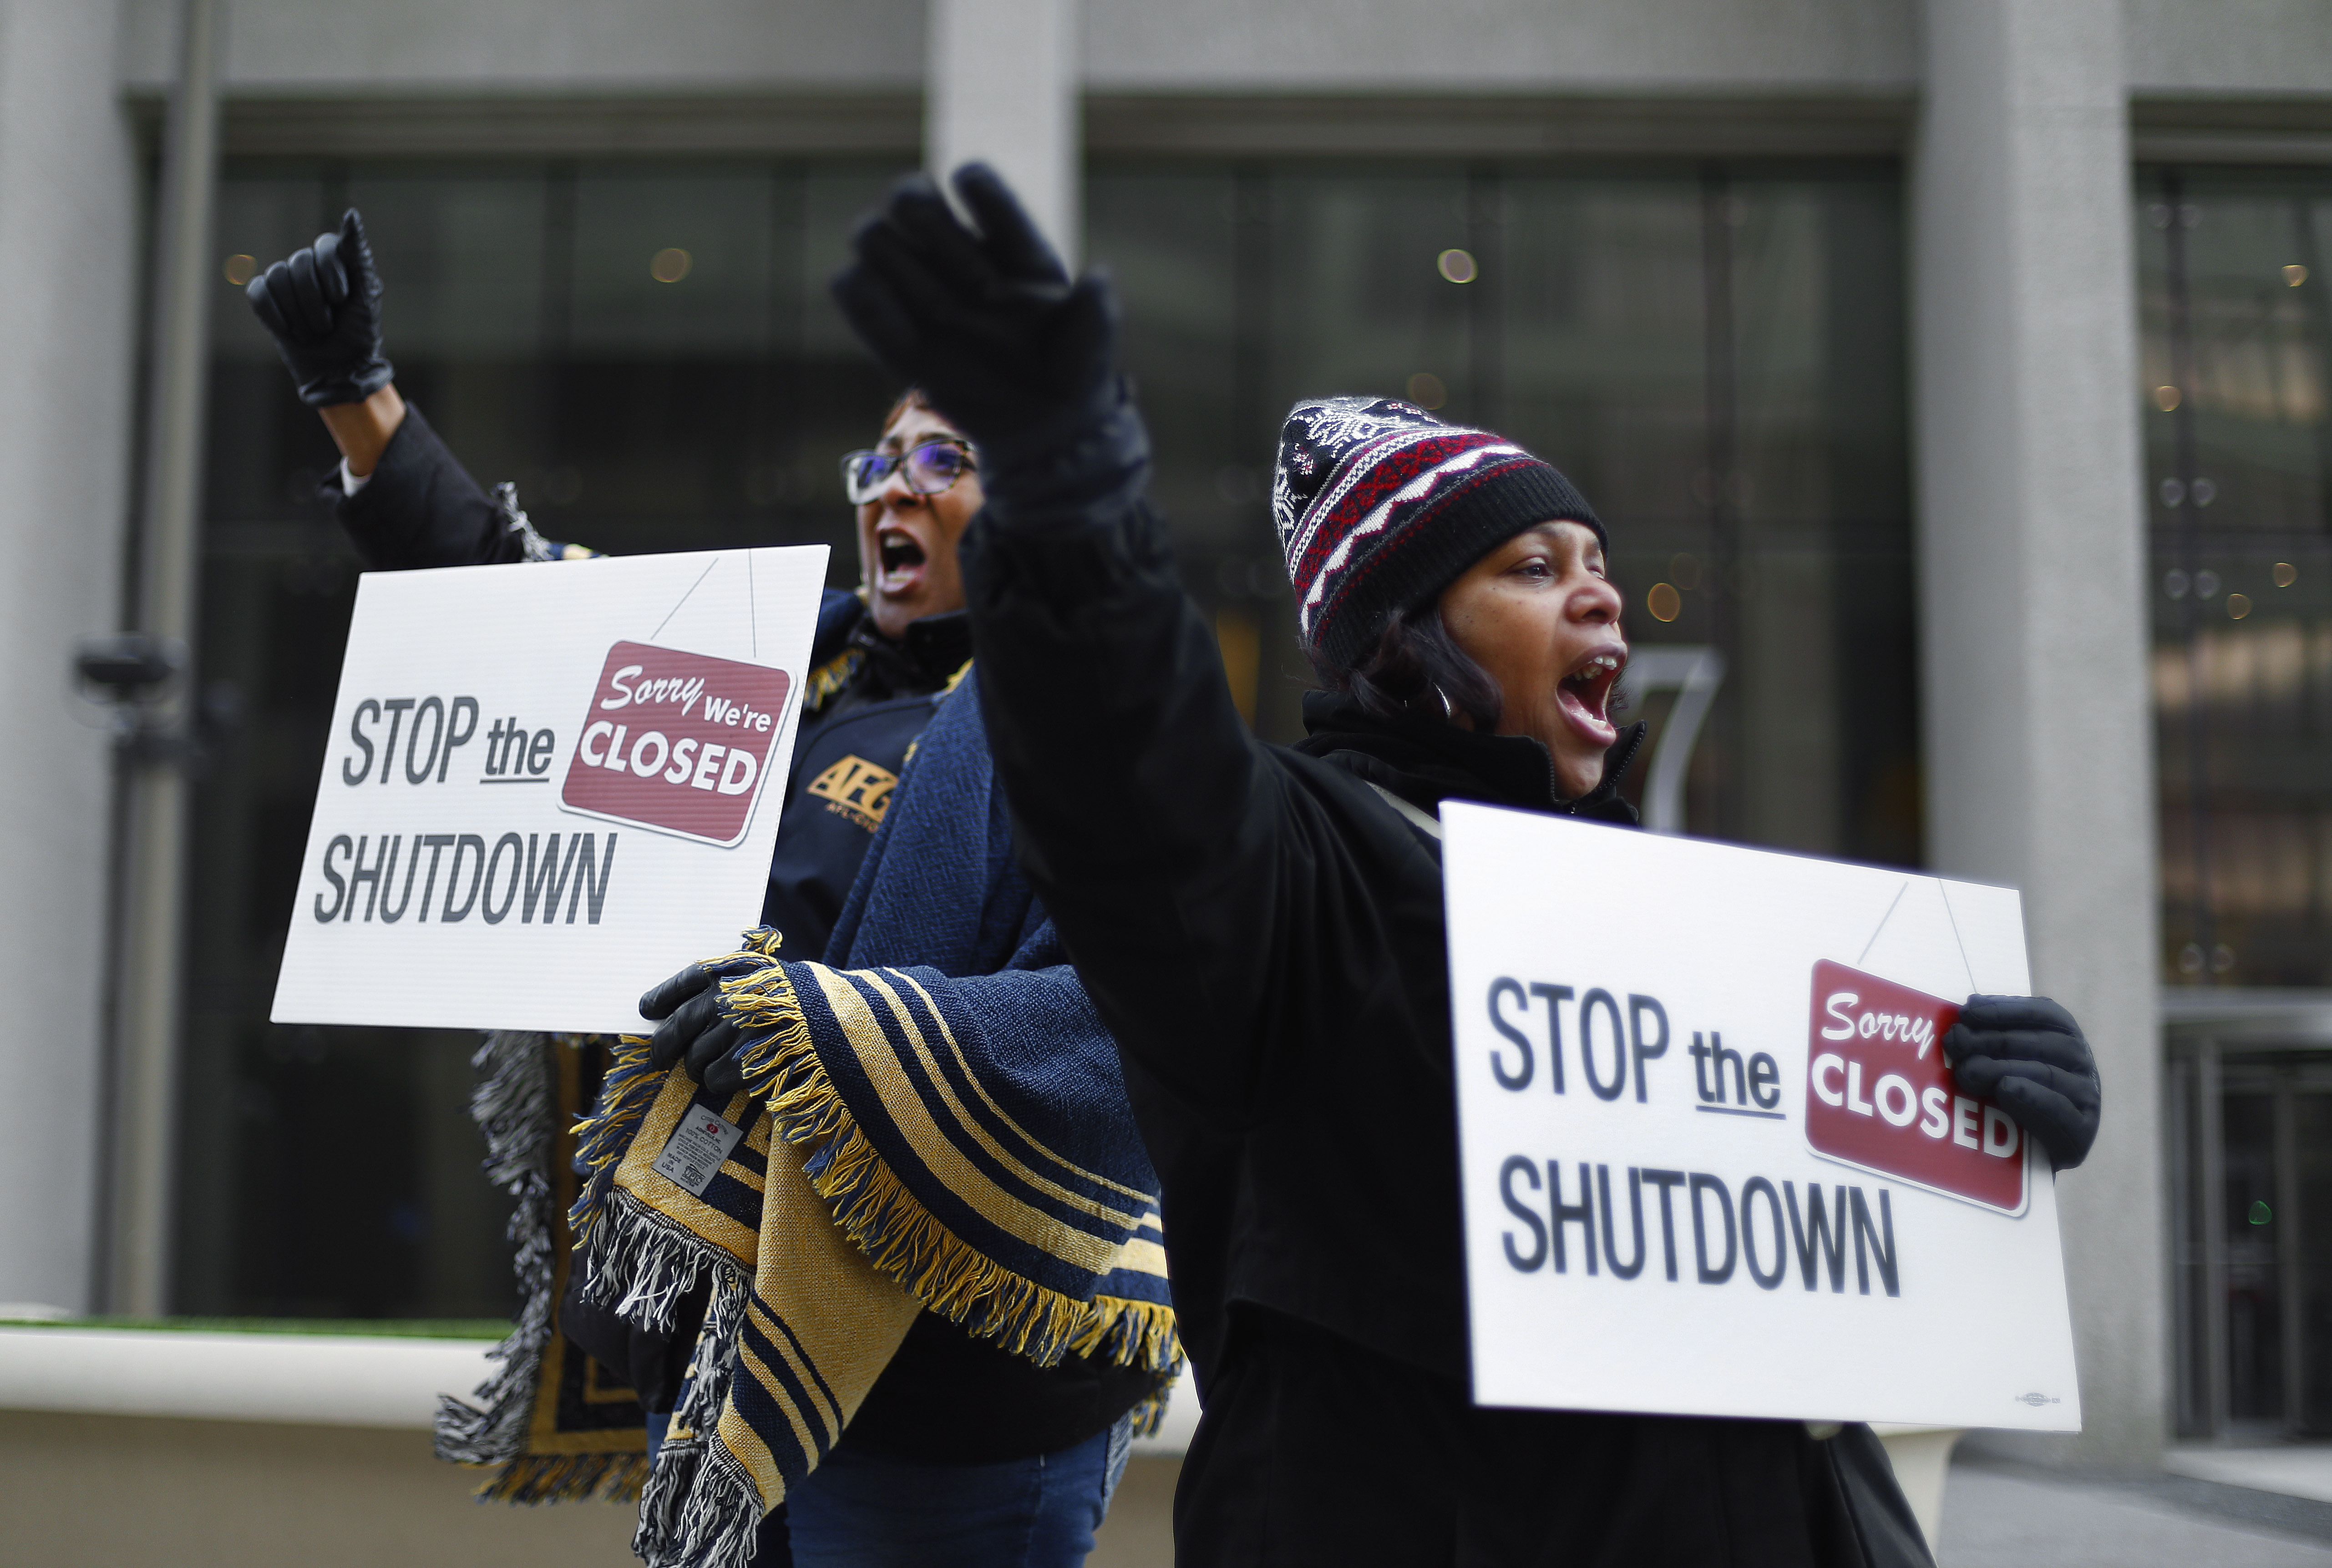 In this January 10, 2019 file photo, Cheryl Monroe, right, a US Food and Drug Administration employee, and Bertrice Sanders, a Social Security Administration employee, rally to call for an end to the partial US government shutdown in Detroit